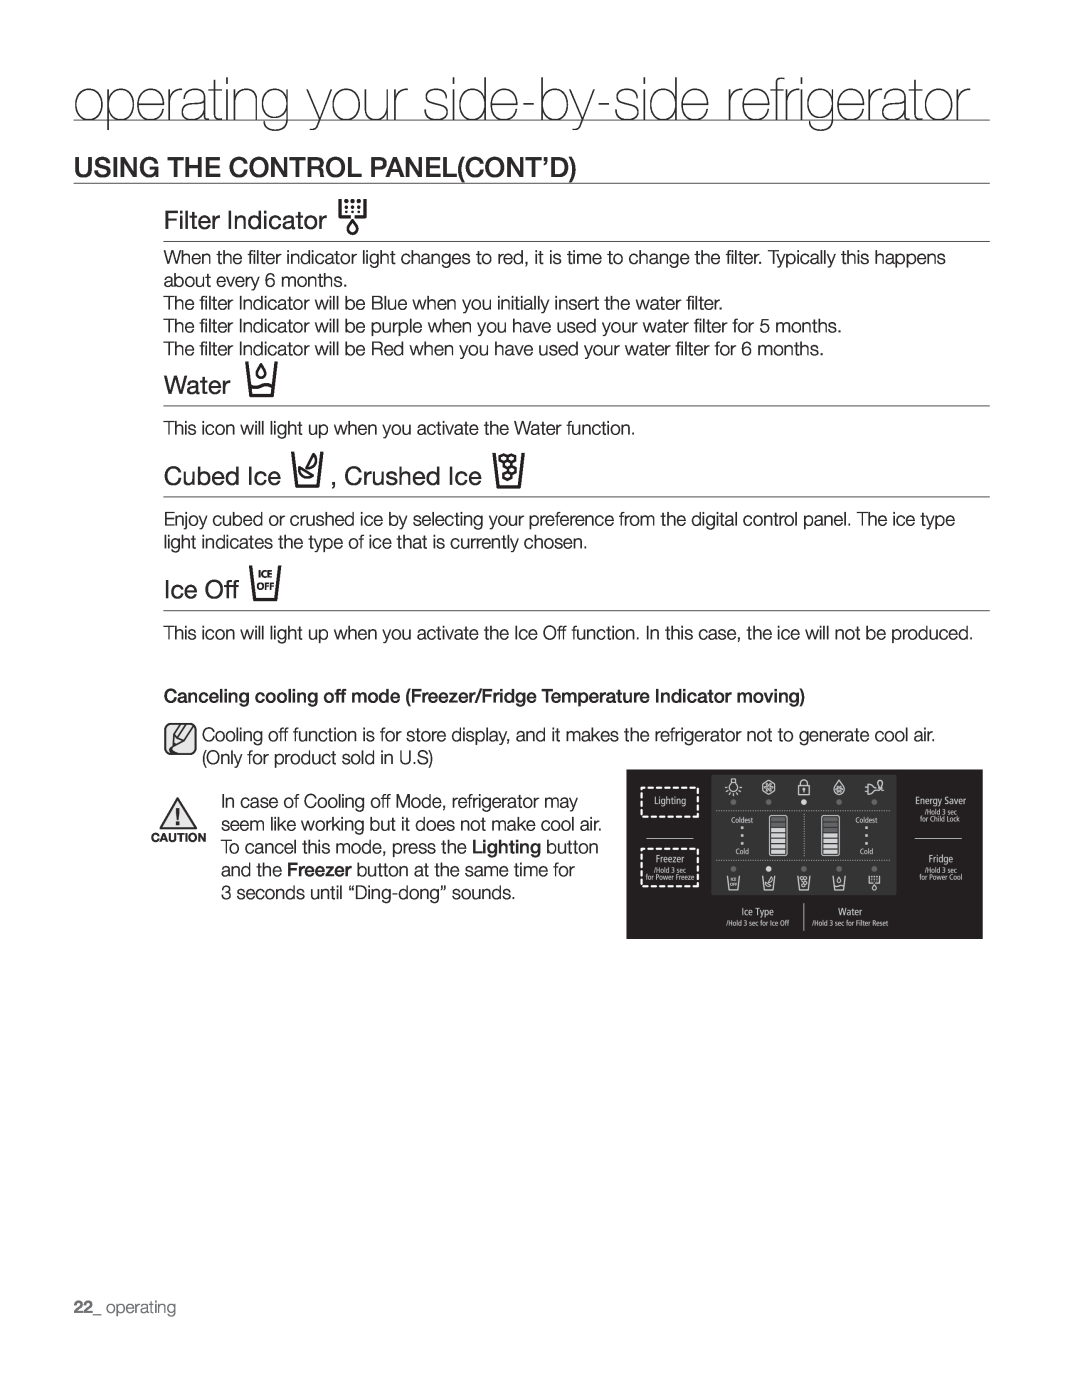 Samsung RS267TDBP user manual Using The Control Panelcont’D, Filter Indicator, Water, Cubed Ice , Crushed Ice, Ice Off 